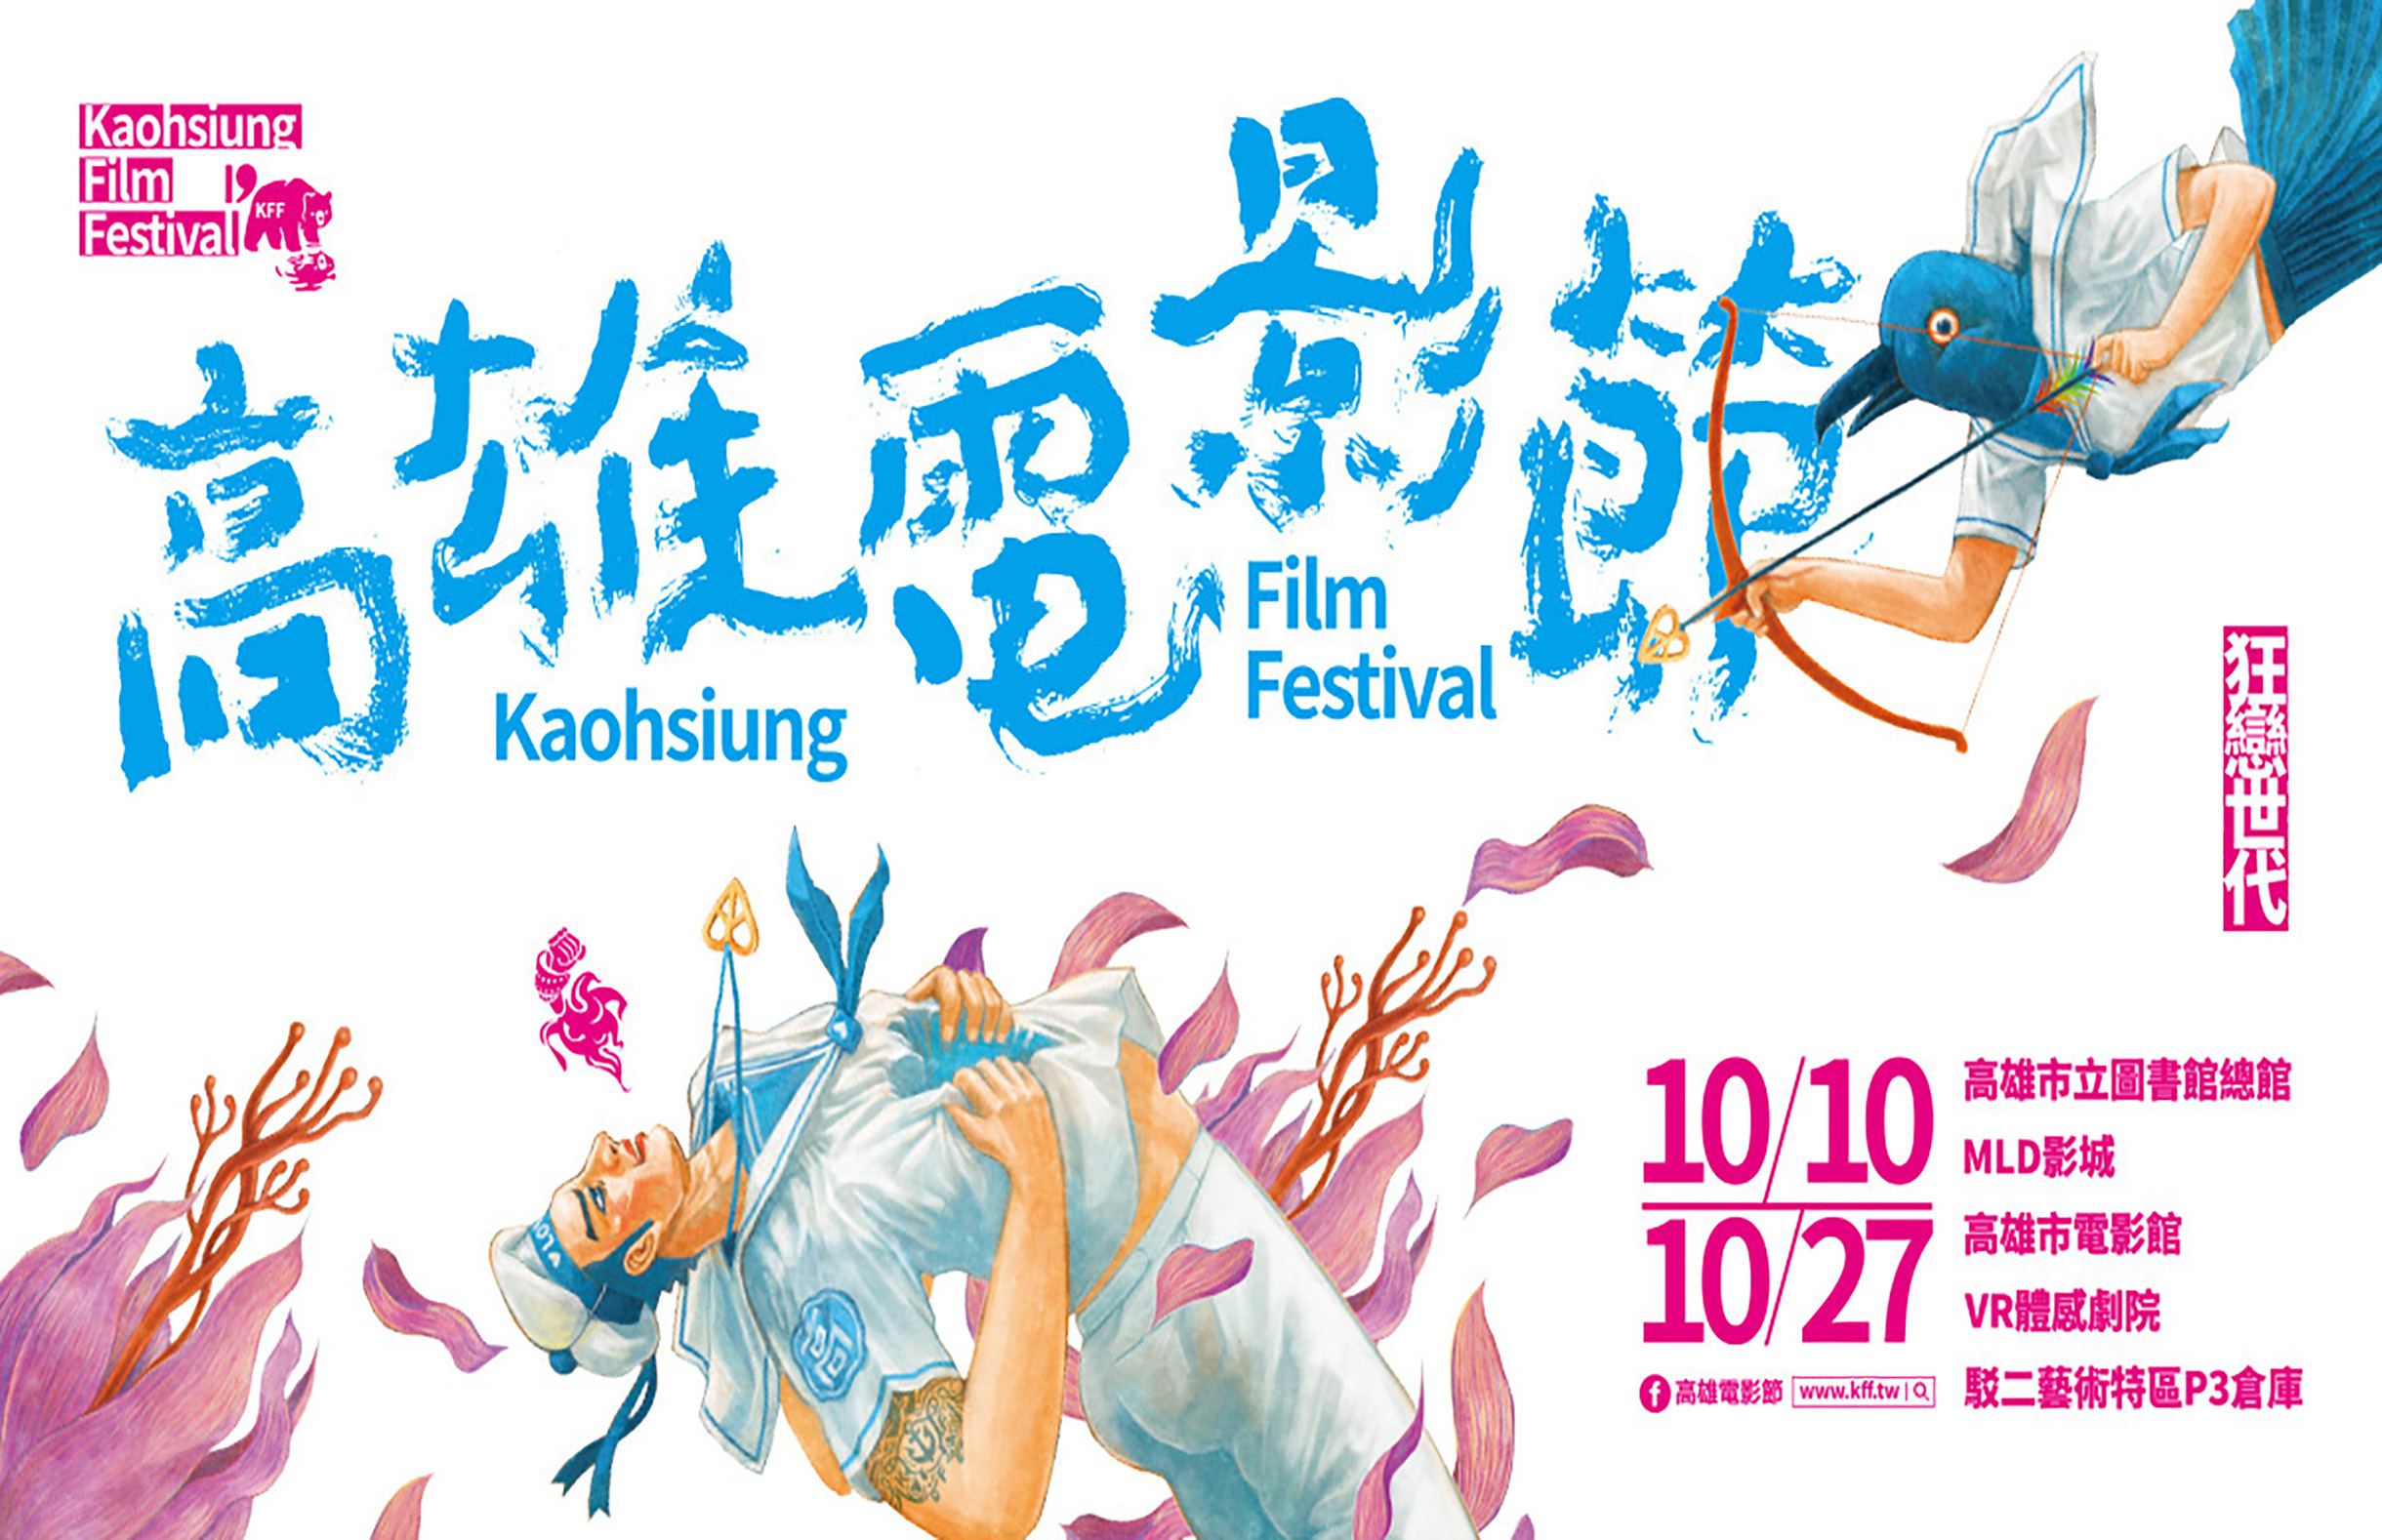 Lucid Realities attends the 2019 Kaohsiung film festival